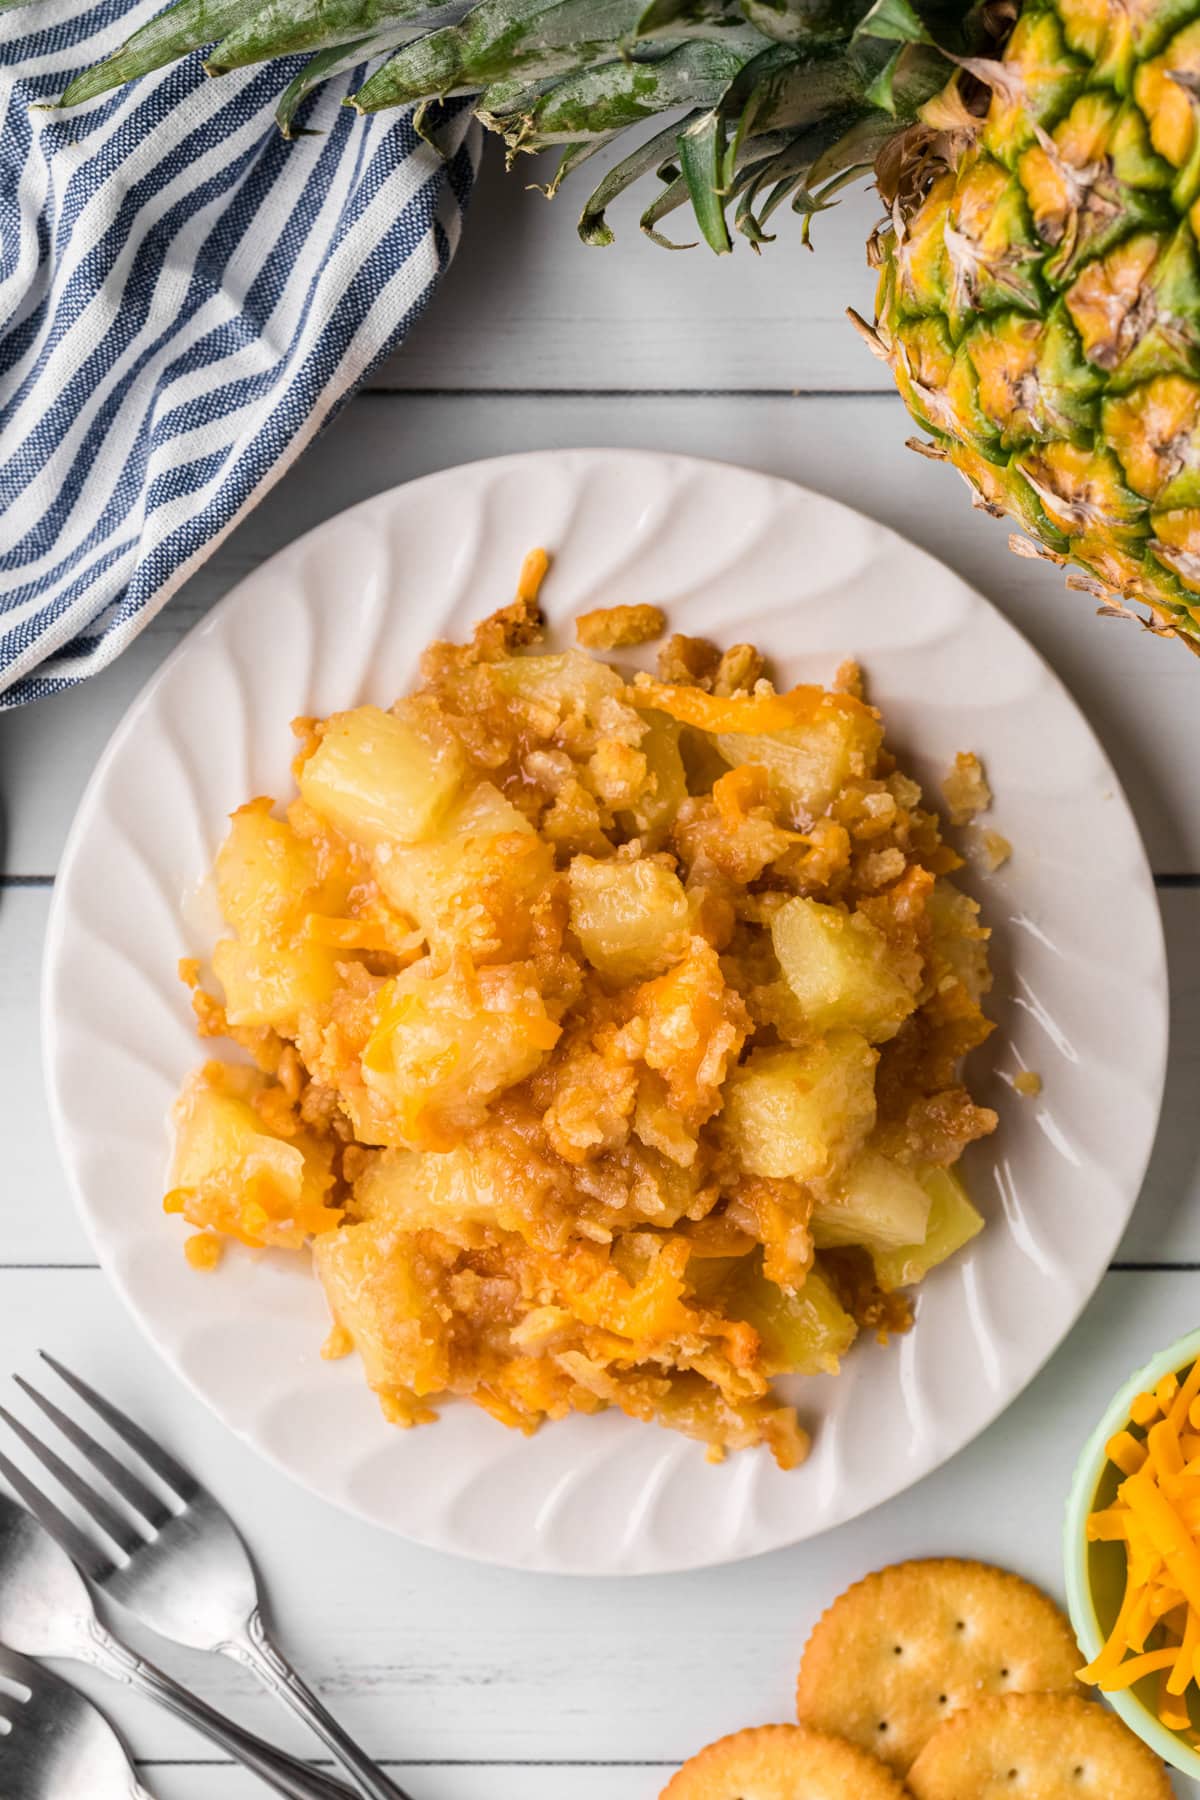 Overhead view of pineapple casserole on a plate.